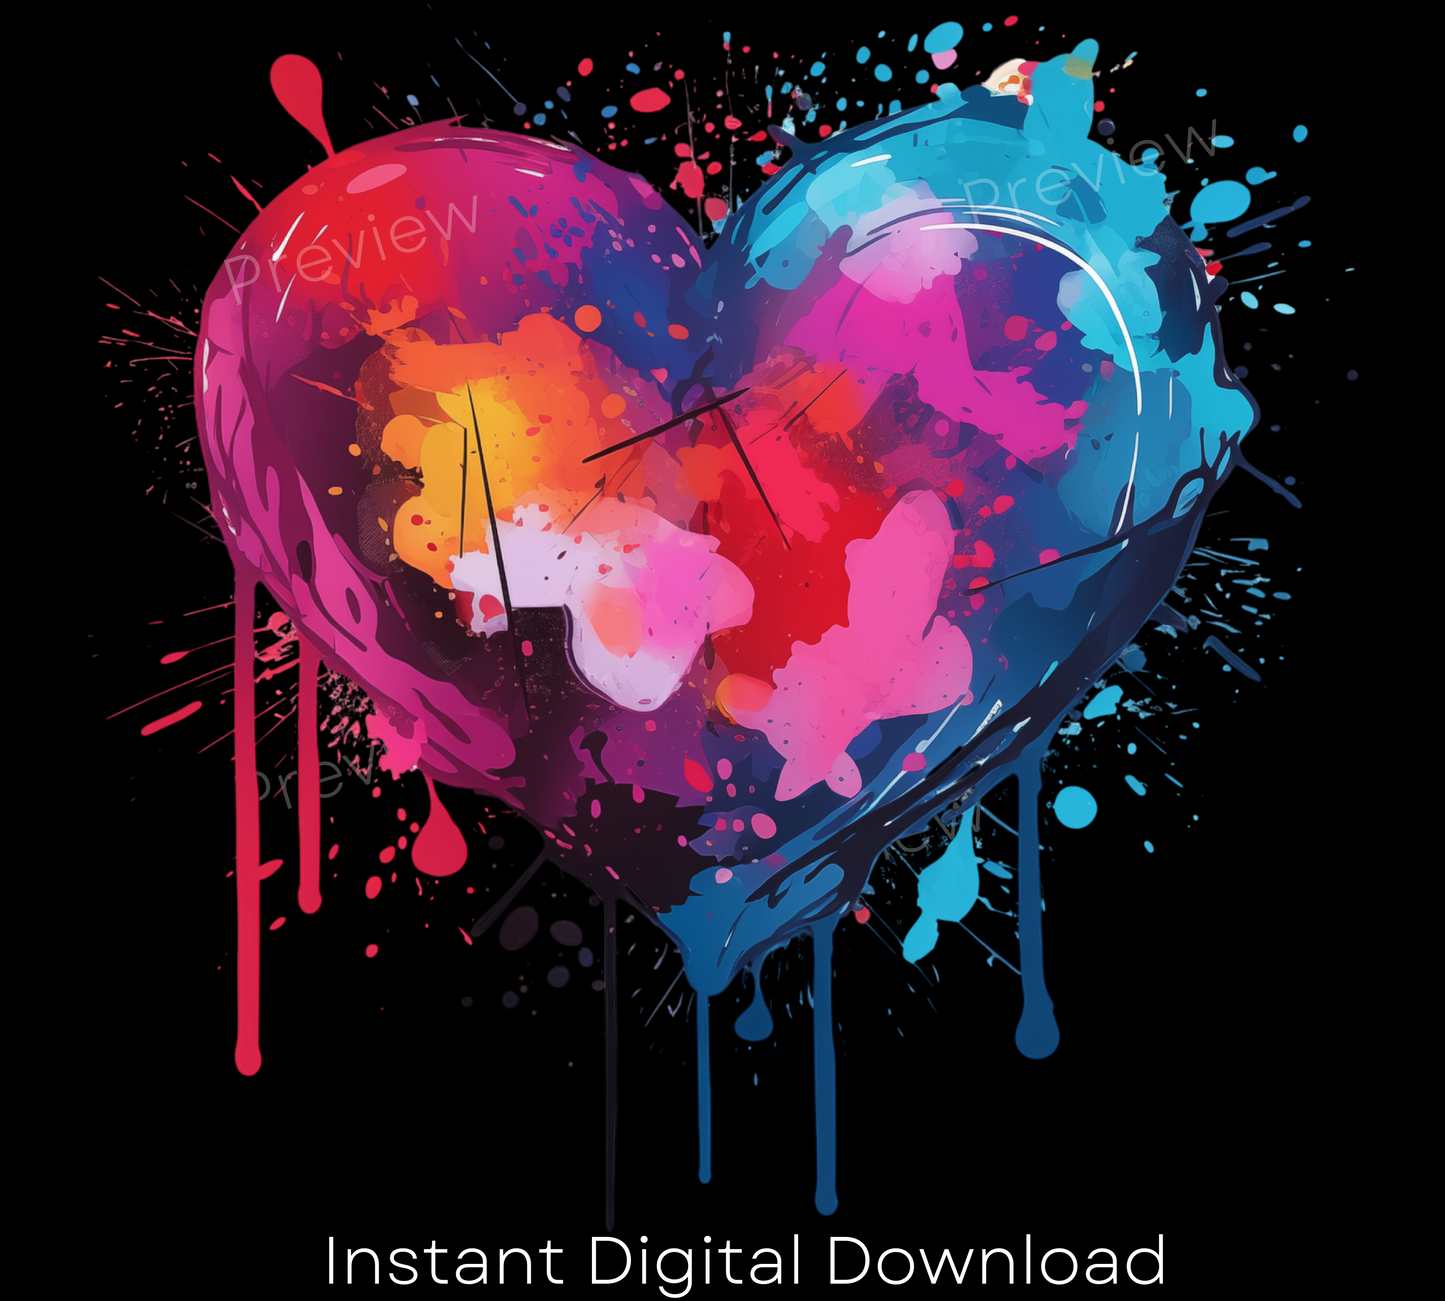 Groovy Neon Heart | Hearts Clip art | Rainbow Heart Png | Print Party | Rainbow Clipart | Background Png | Instant Download | Commercial Use